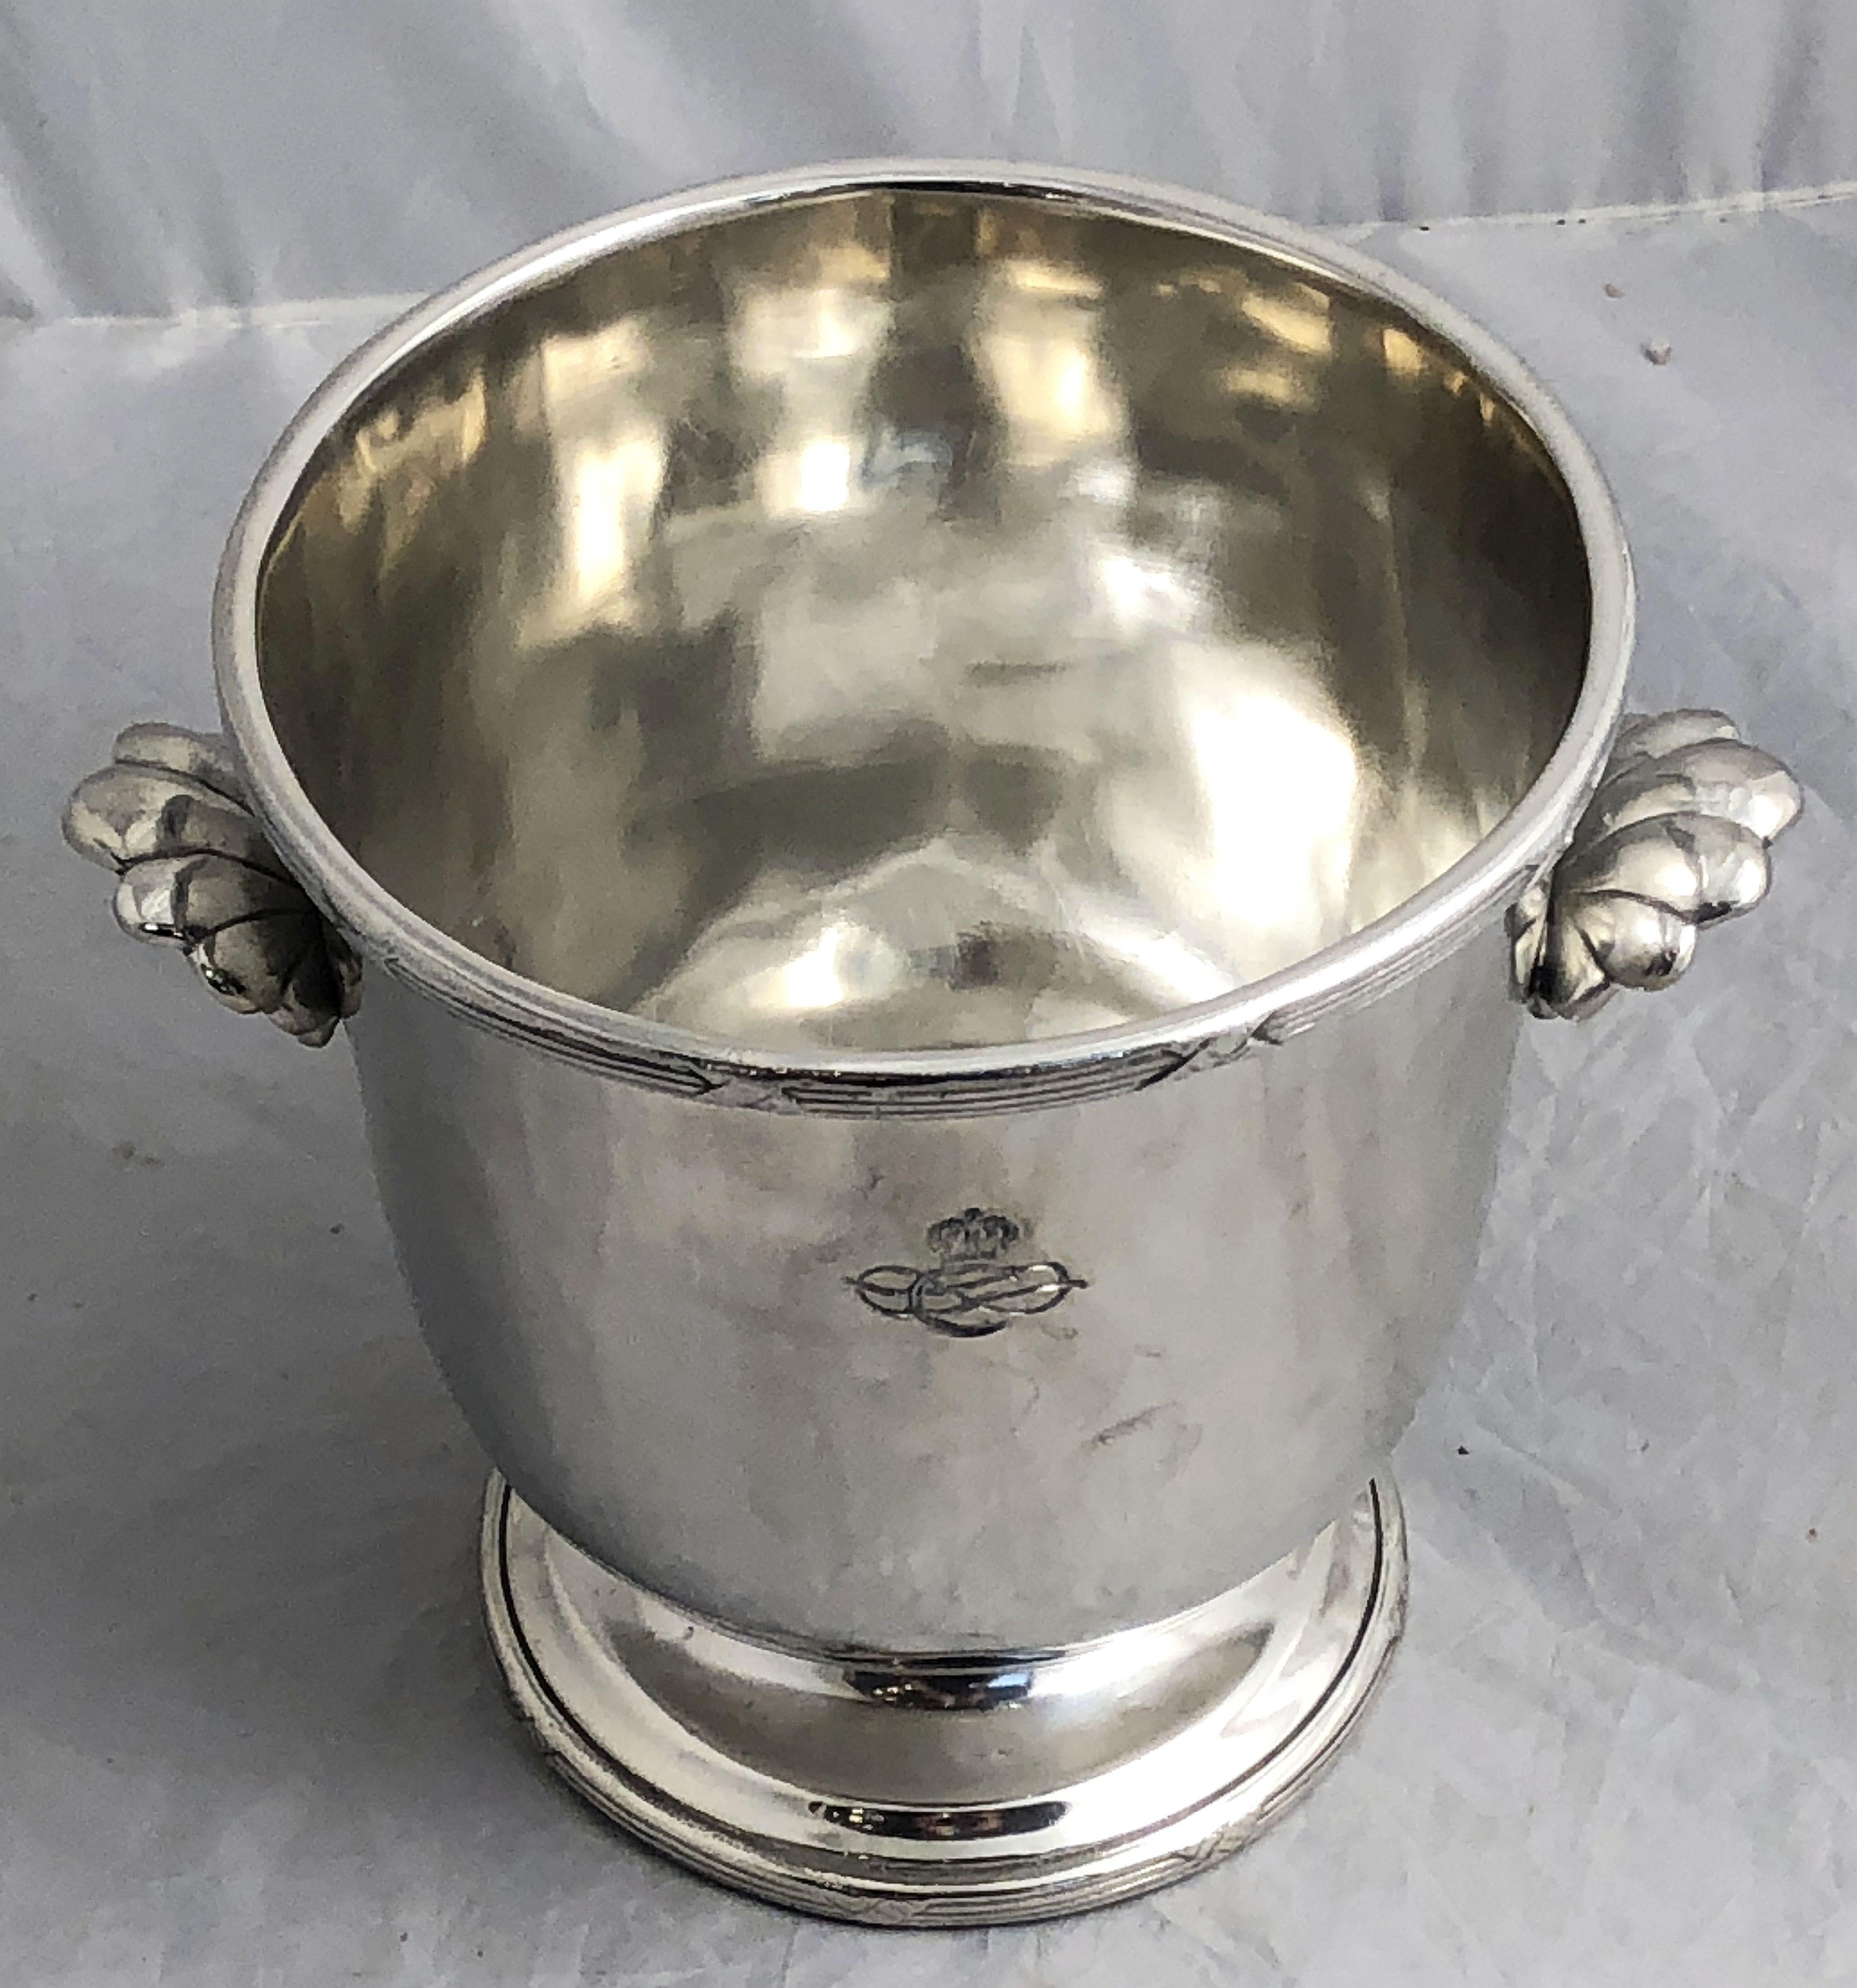 A fine Italian champagne server or bottle holder (ice bucket urn) from the Collezione Italia Navigazione - a fleet of Italian luxury passenger ships that operated in the 1920s and 1930s.

Featuring a raised ribbon edge over a round footed bowl with